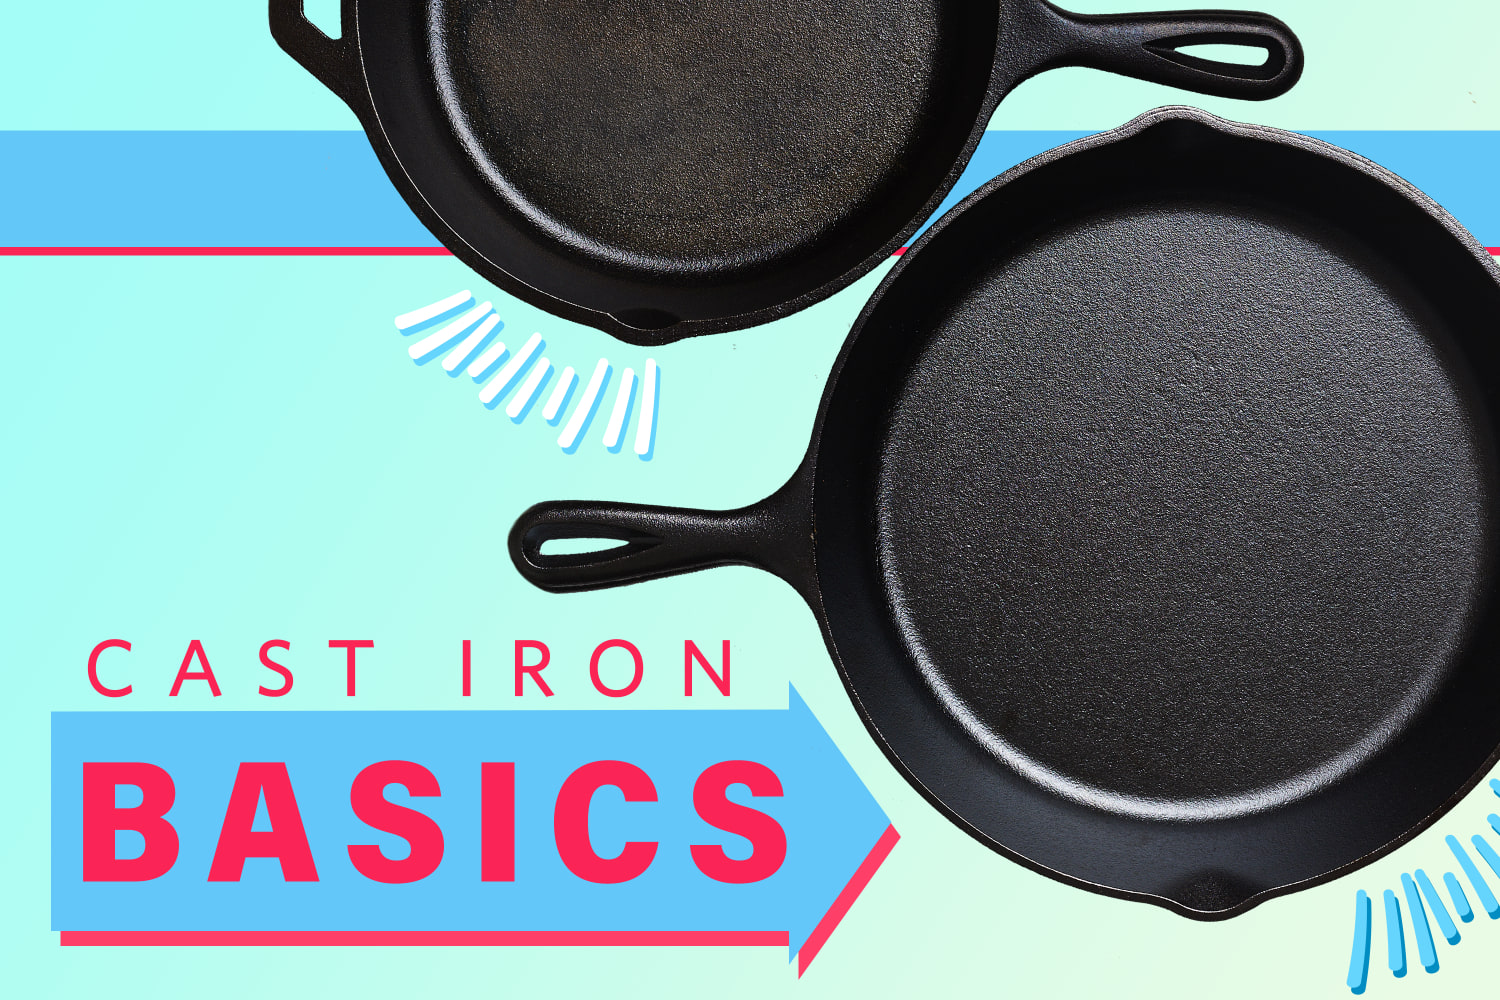 Cooking With a Cast-Iron Skillet: Here's Everything You Need to Know